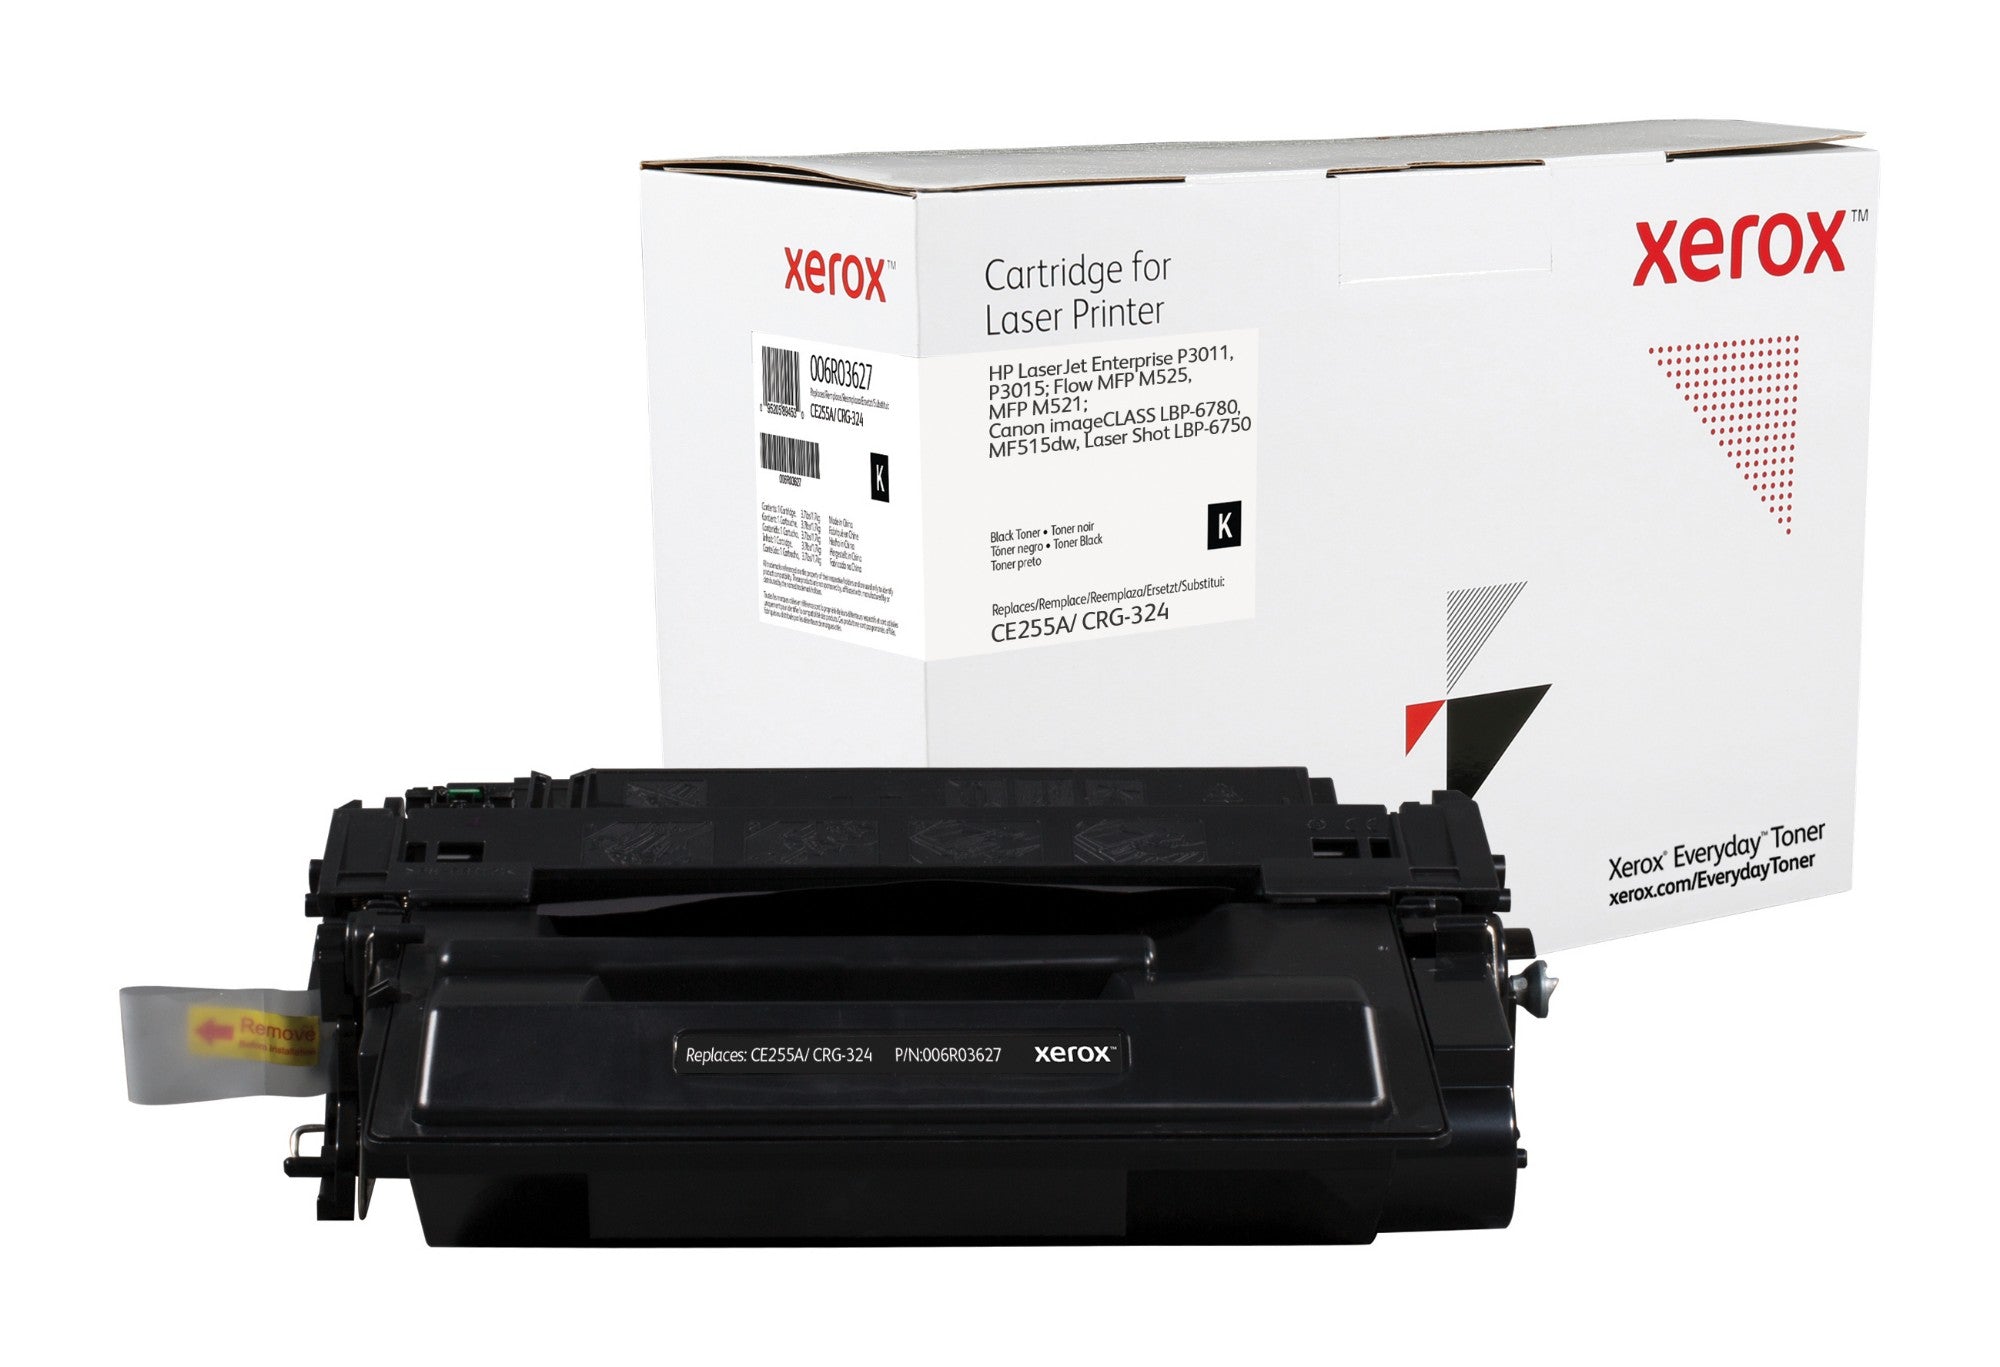 Xerox 006R03627 Toner cartridge black, 6K pages (replaces Canon 724 HP 55A/CE255A) for Canon LBP-6750/HP LaserJet P 3015